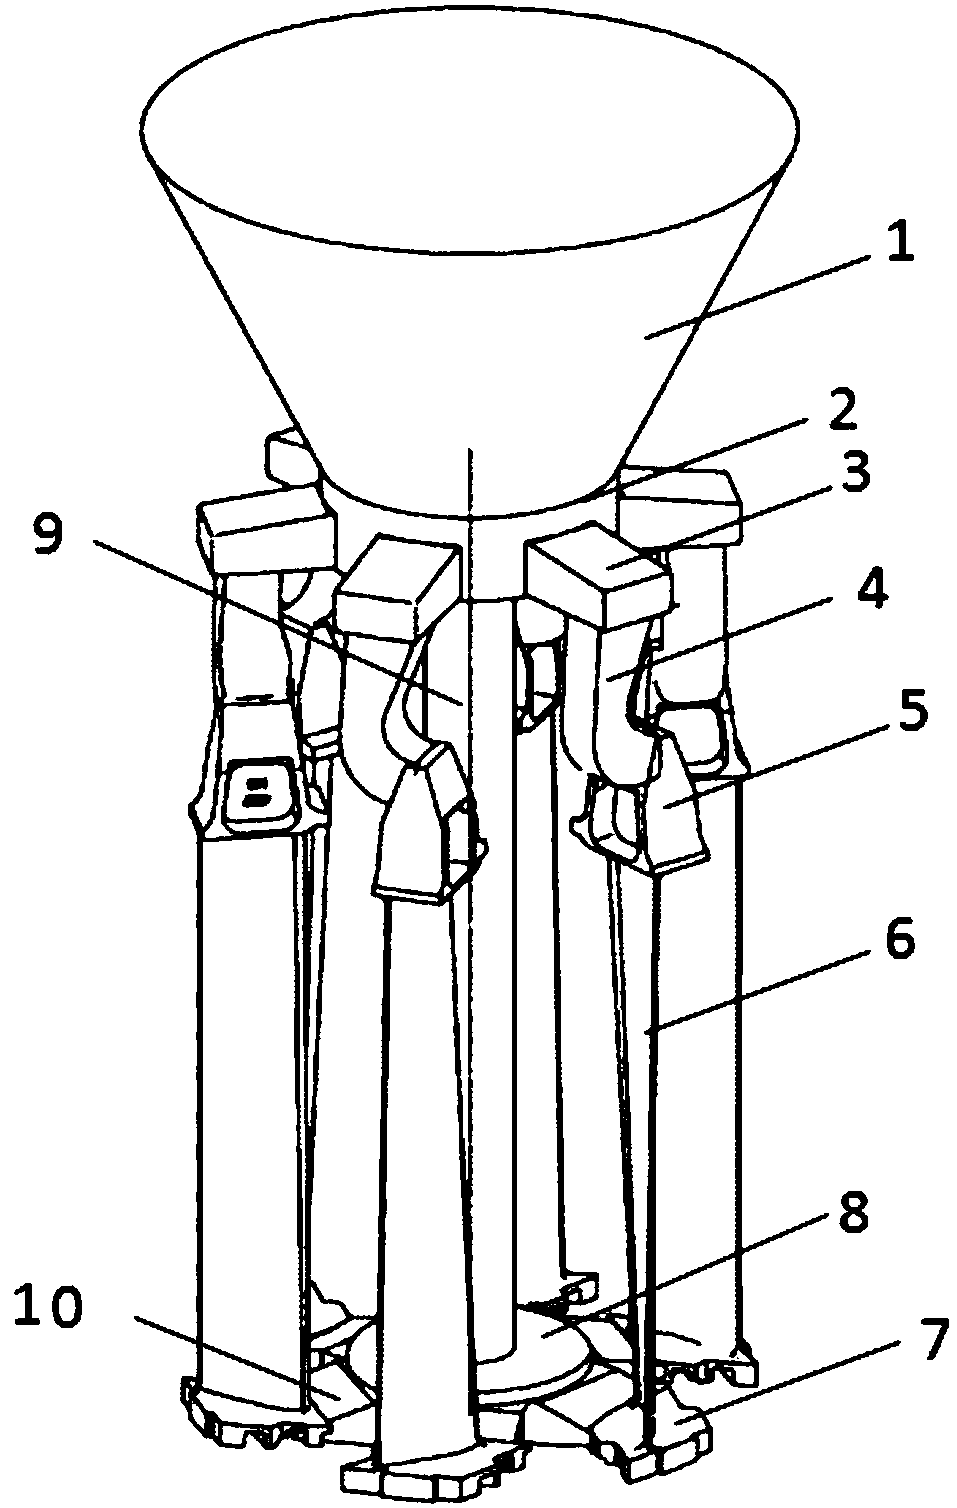 Loose control method for fine and long thin-wall crowned isometric crystal cast turbine blade